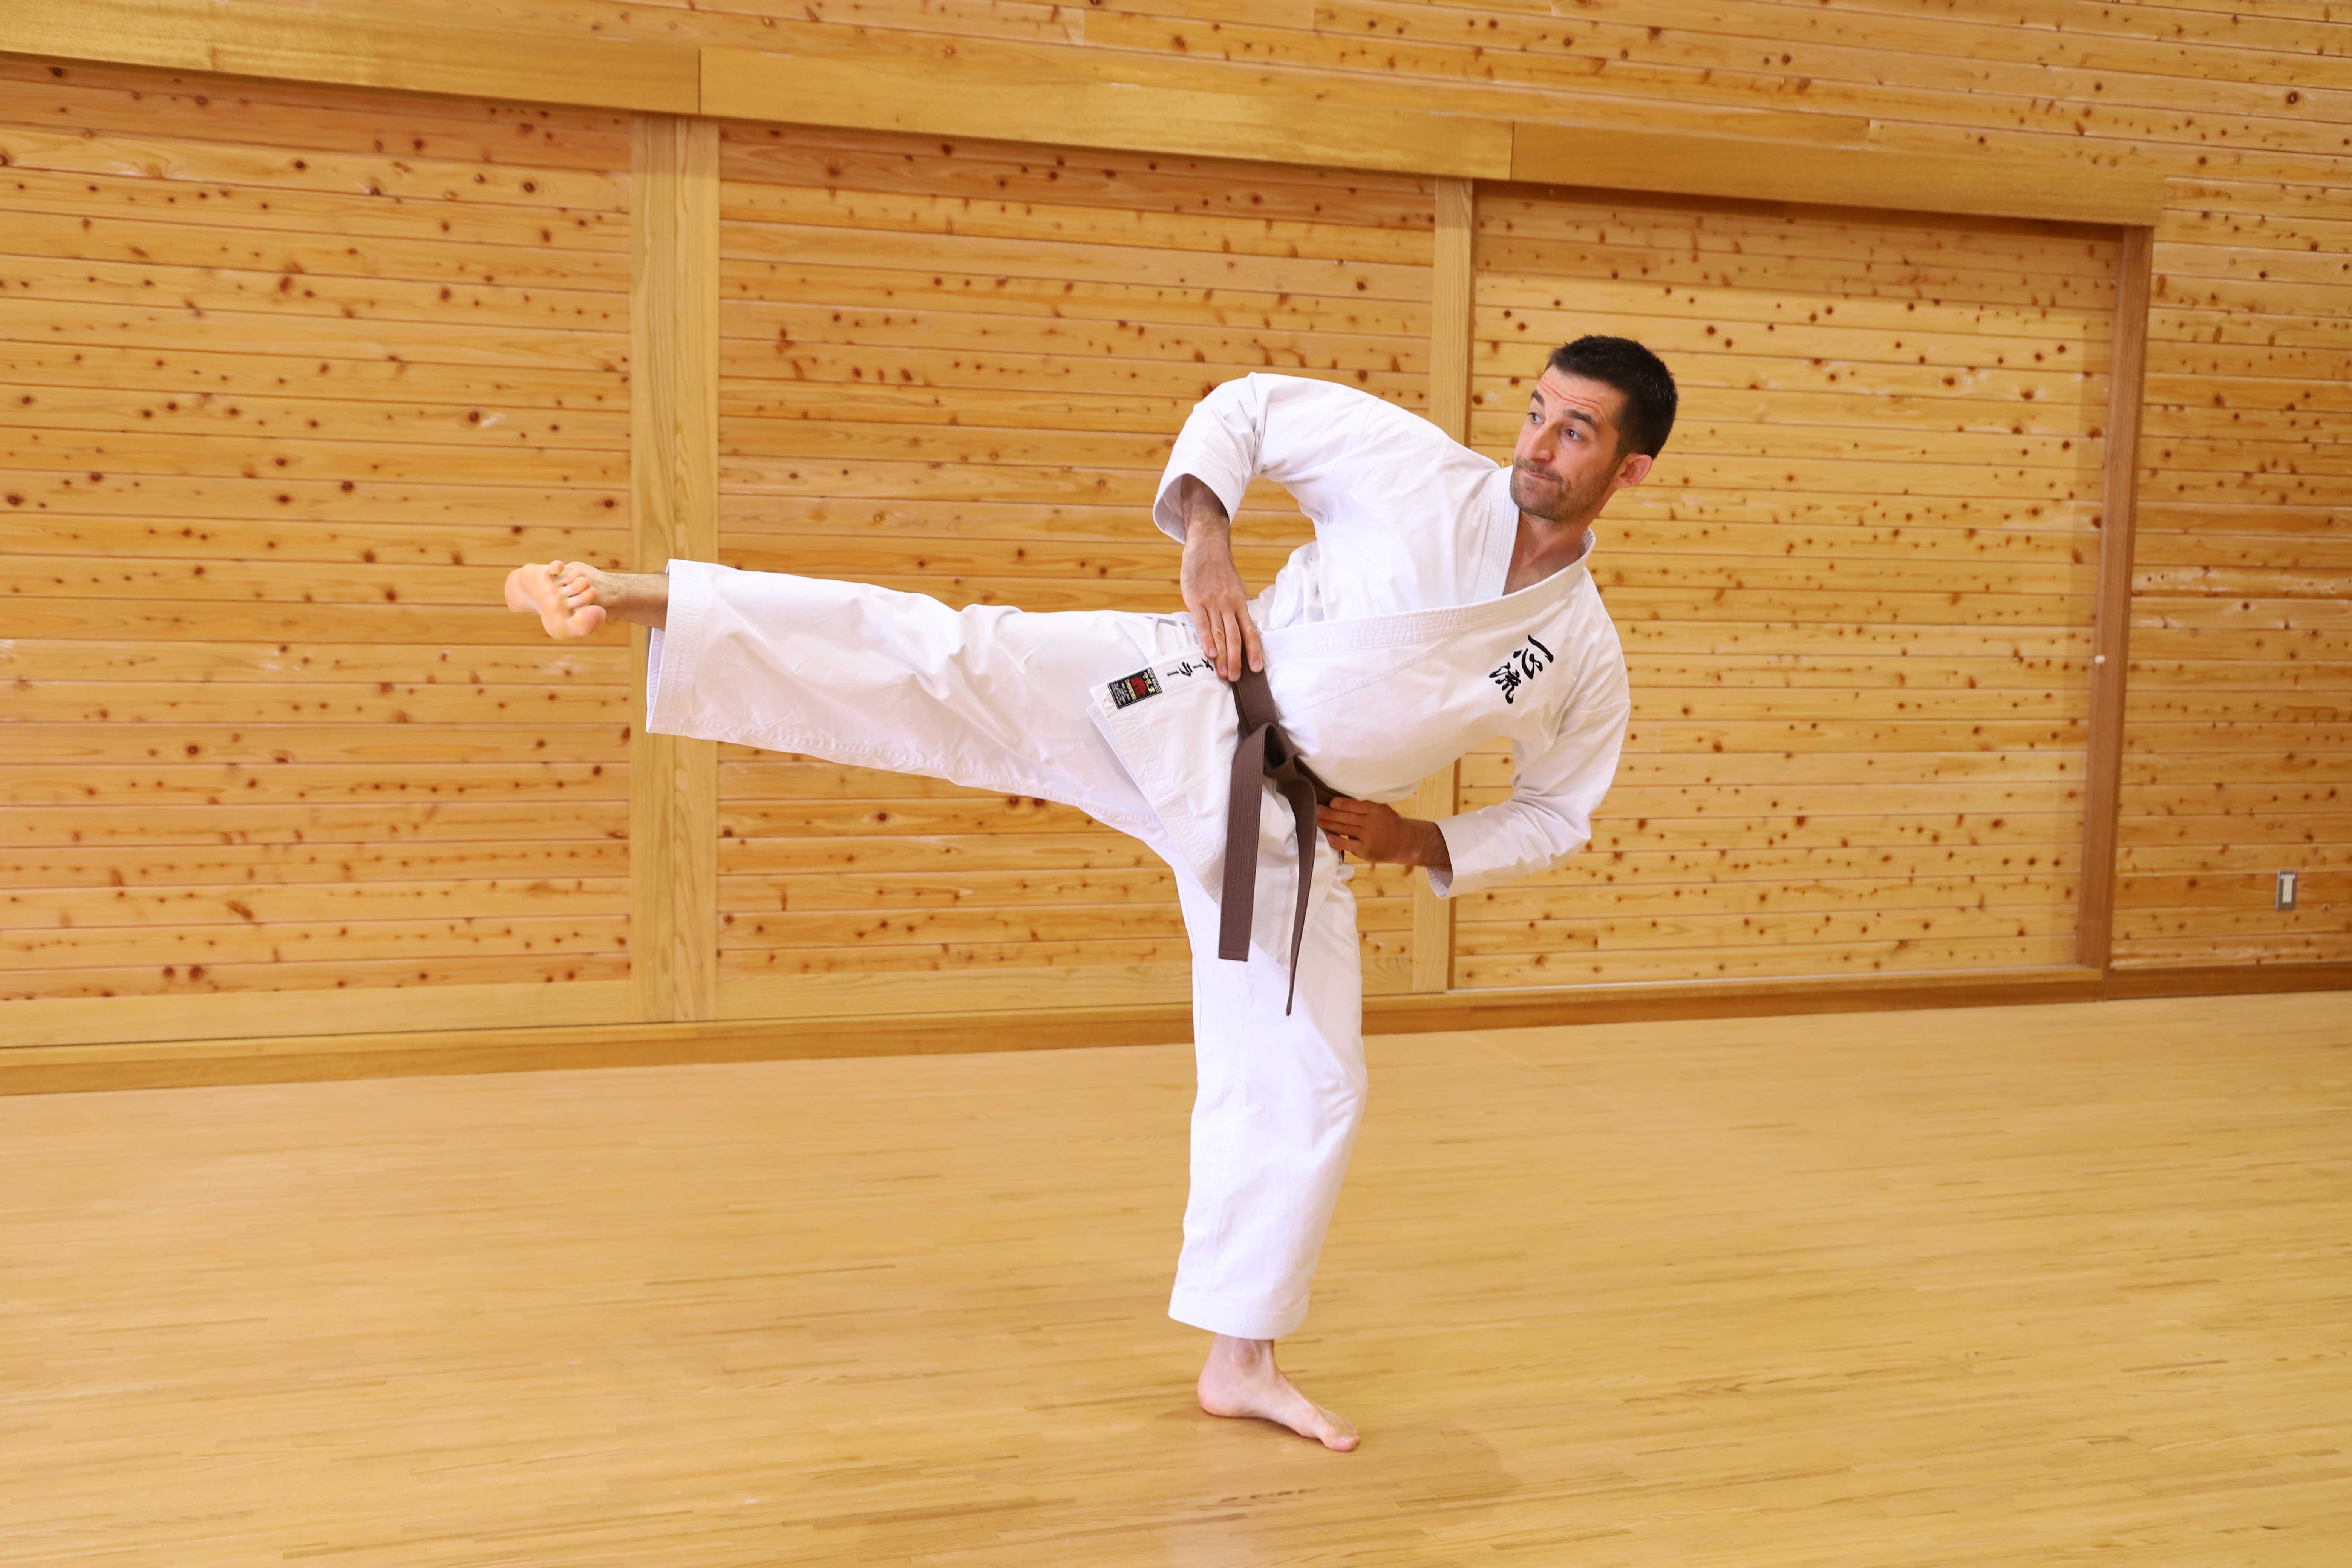 A wealth of hands-on karate programs